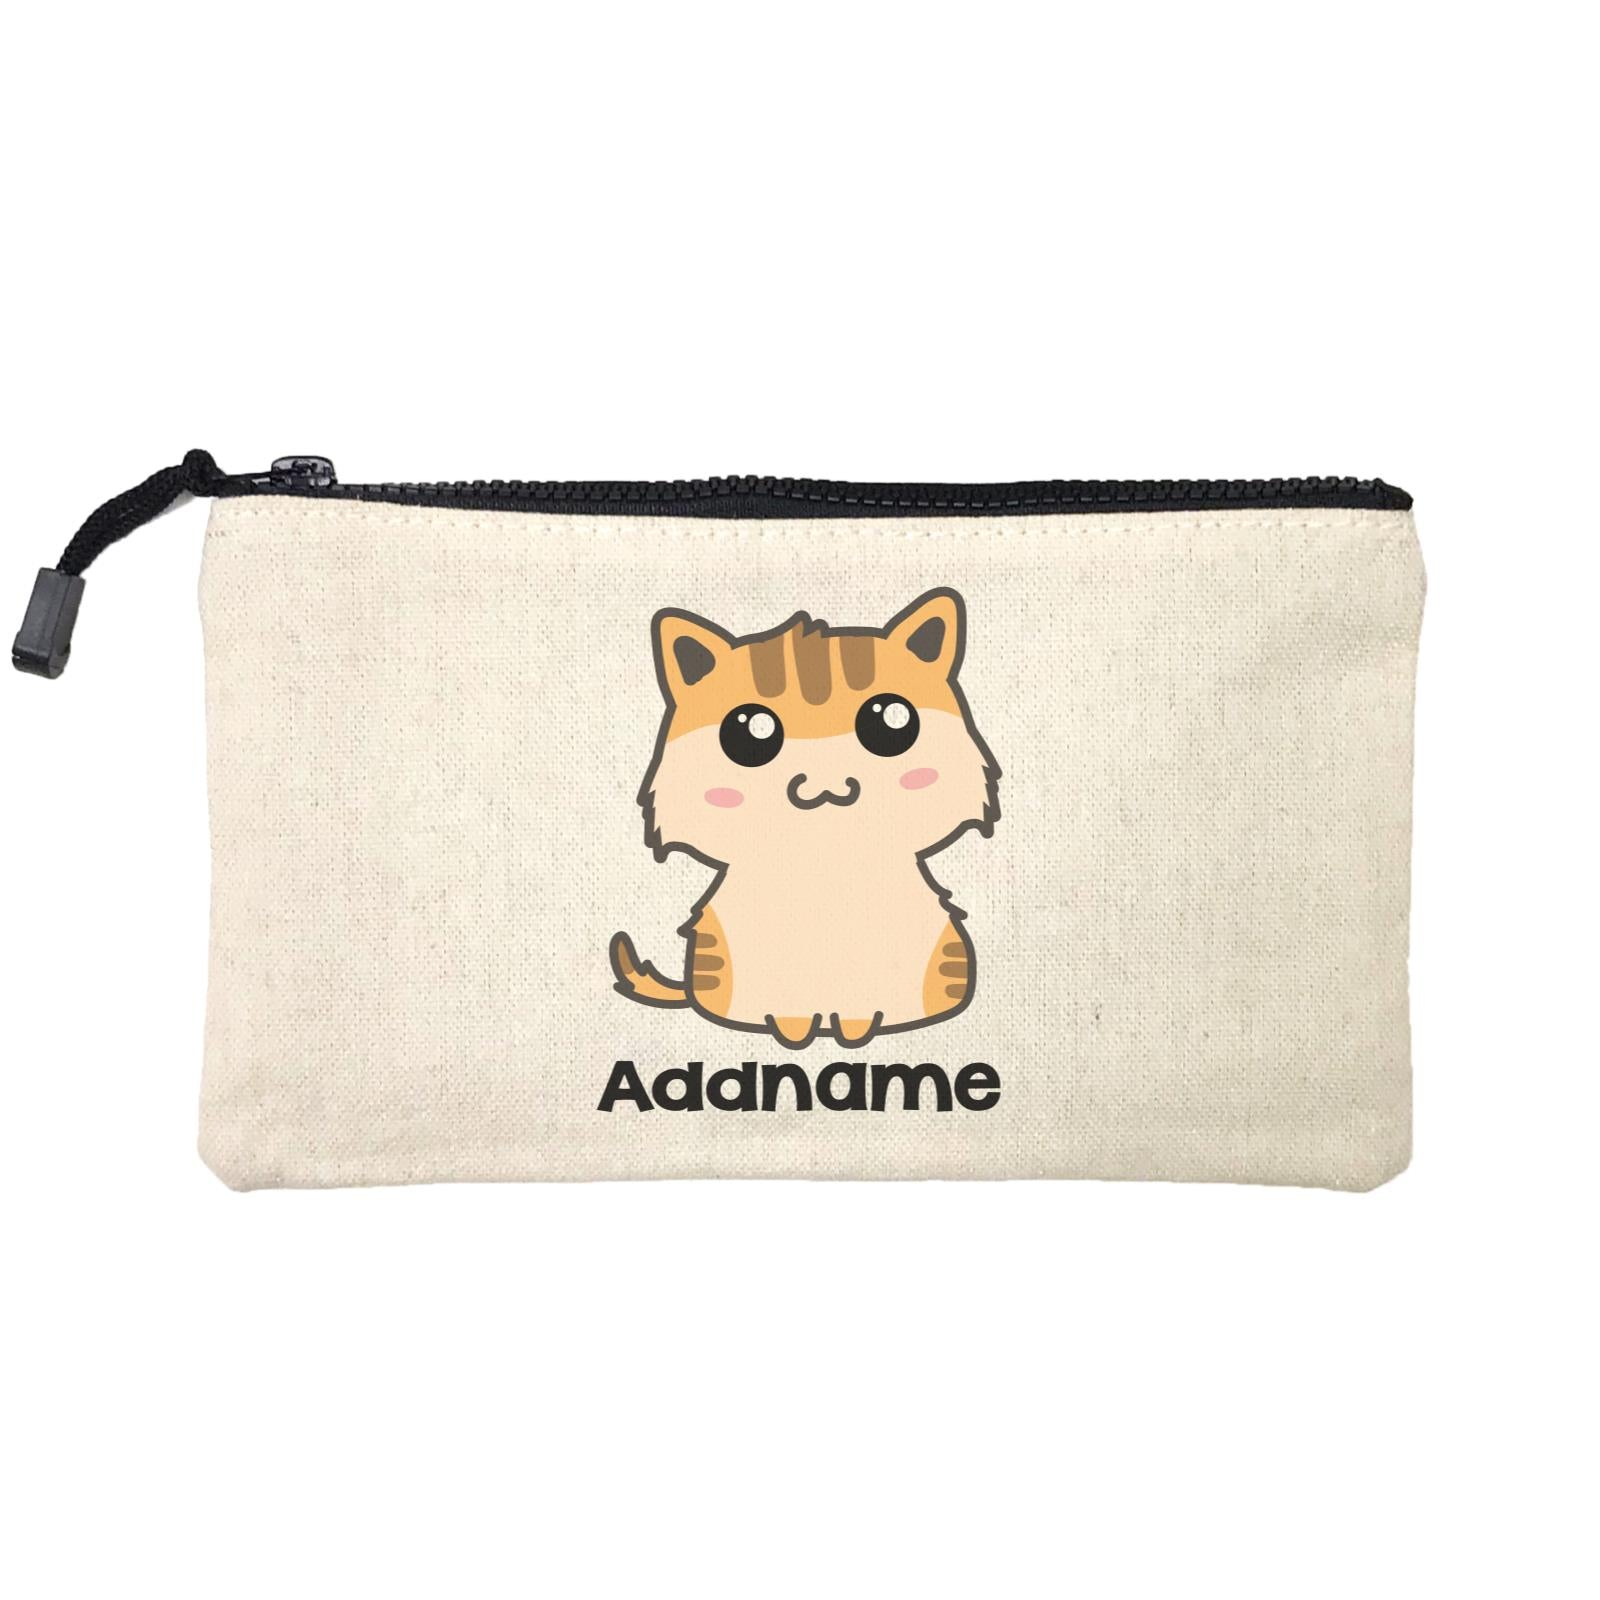 Drawn Adorable Cats Cream & Yellow Addname Mini Accessories Stationery Pouch